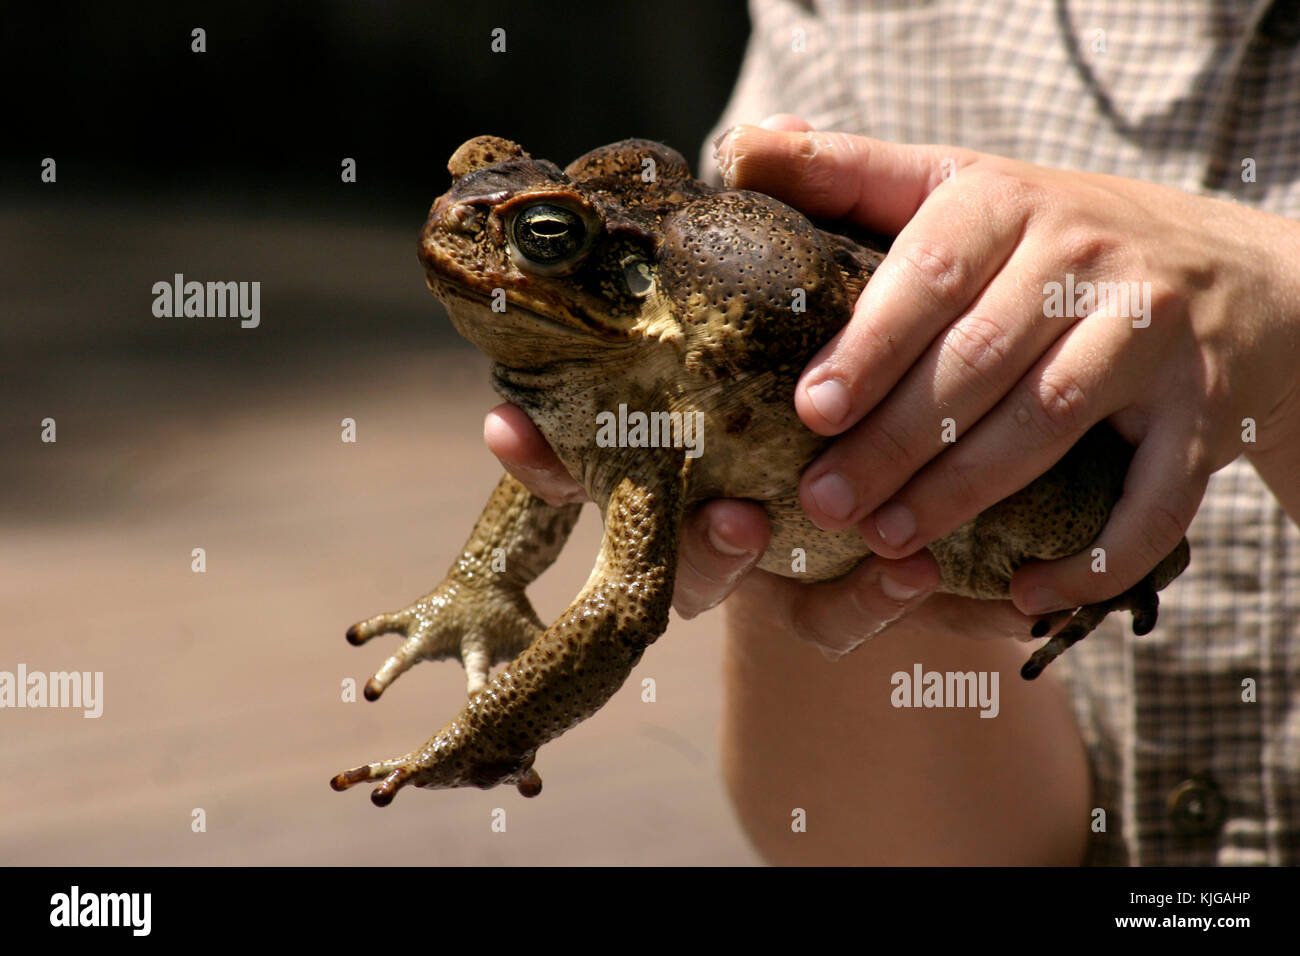 Large cane toad held by man Stock Photo